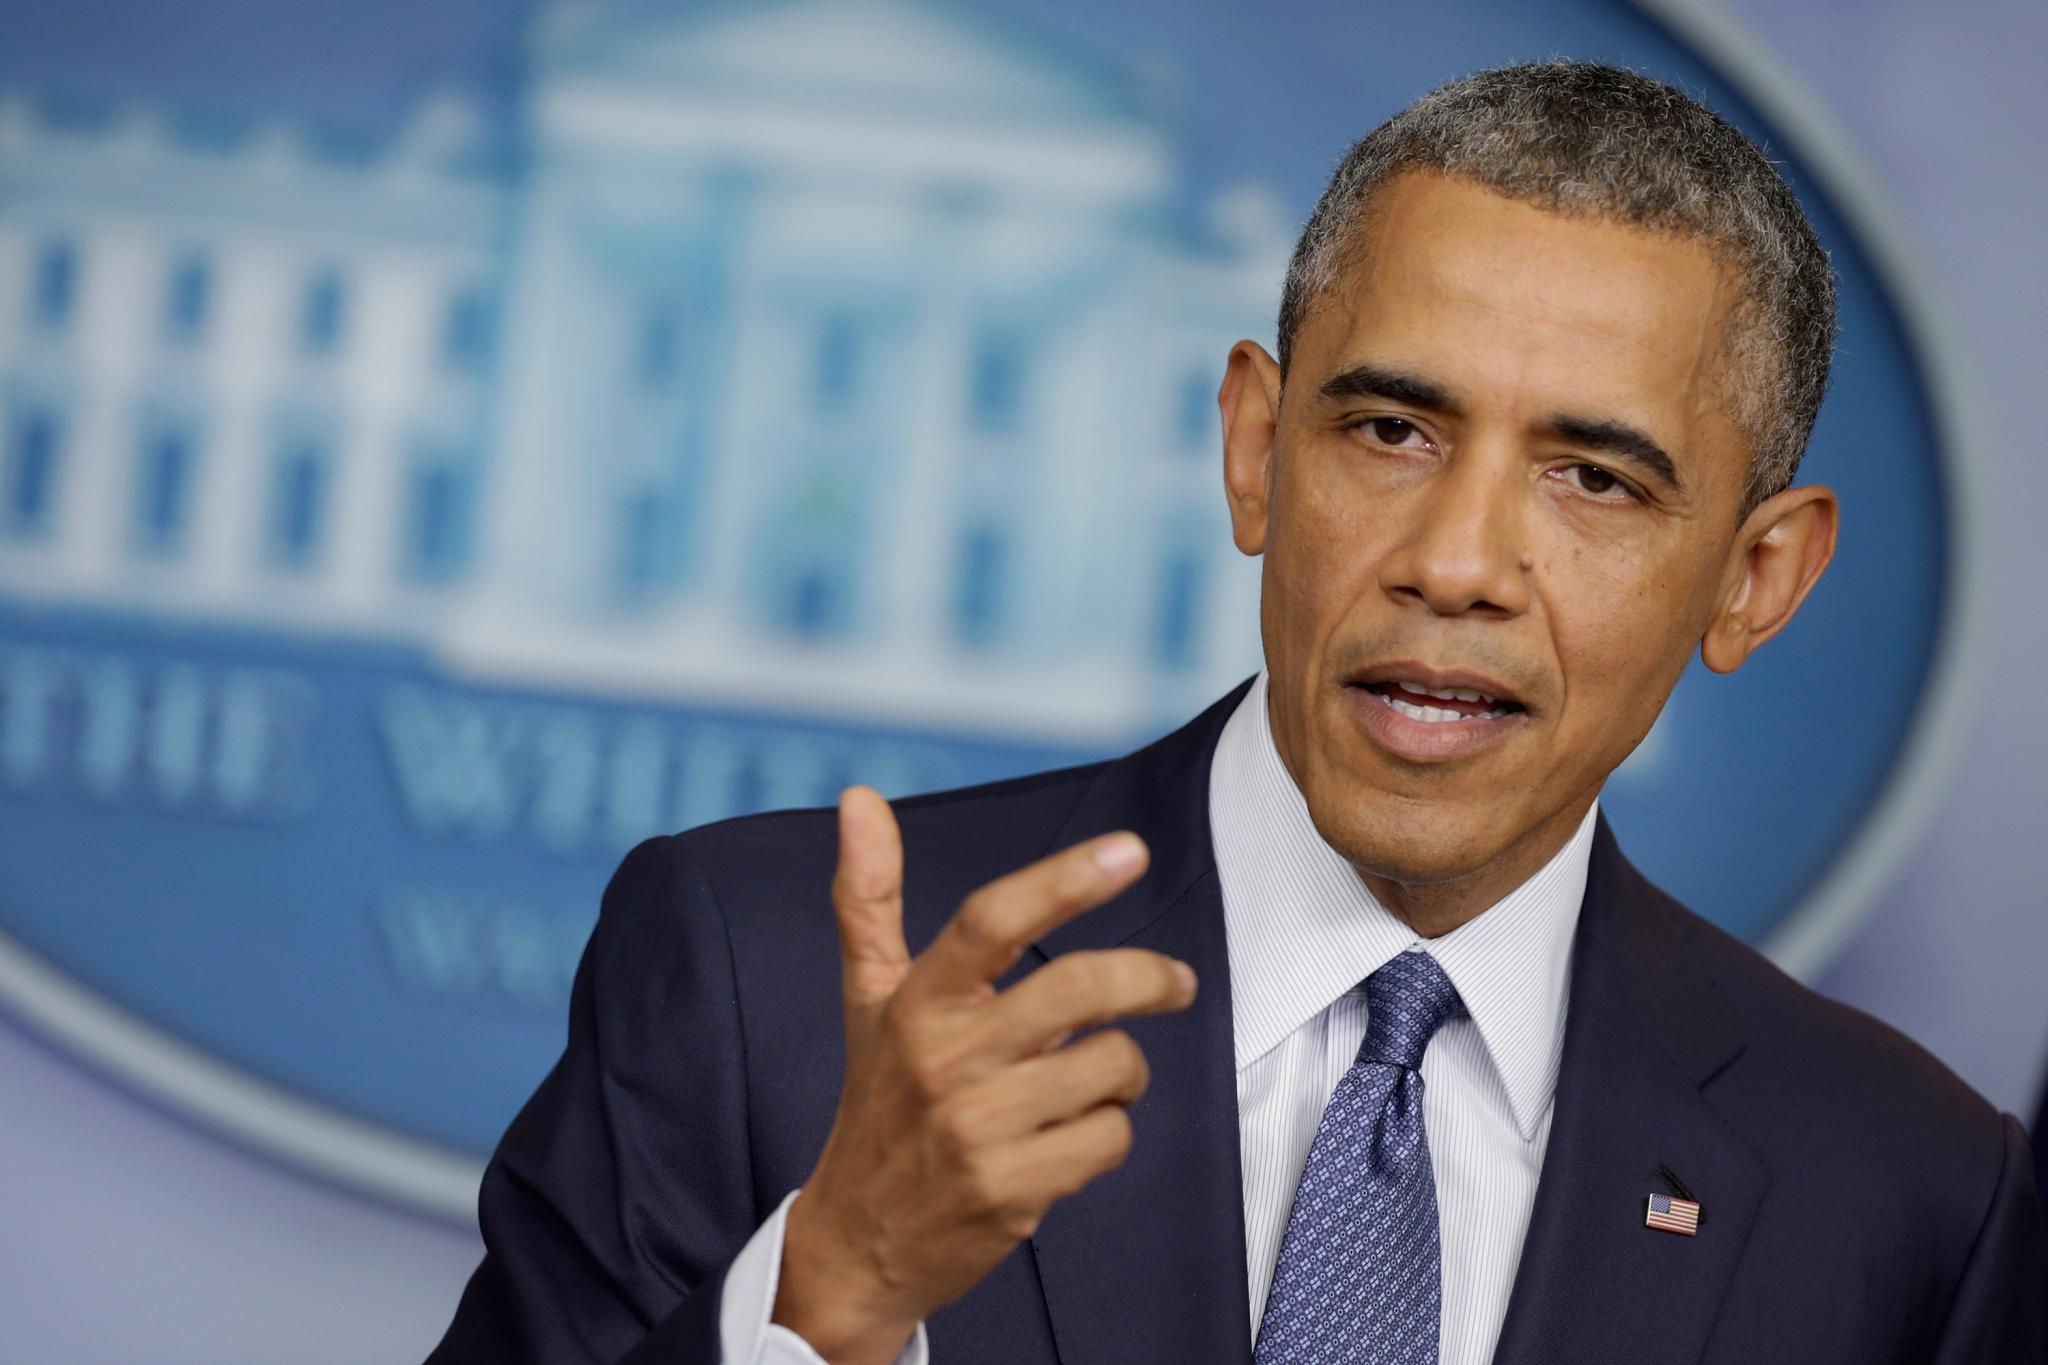 President Obama to Announce Executive Order on 'Ban the Box' Policy
